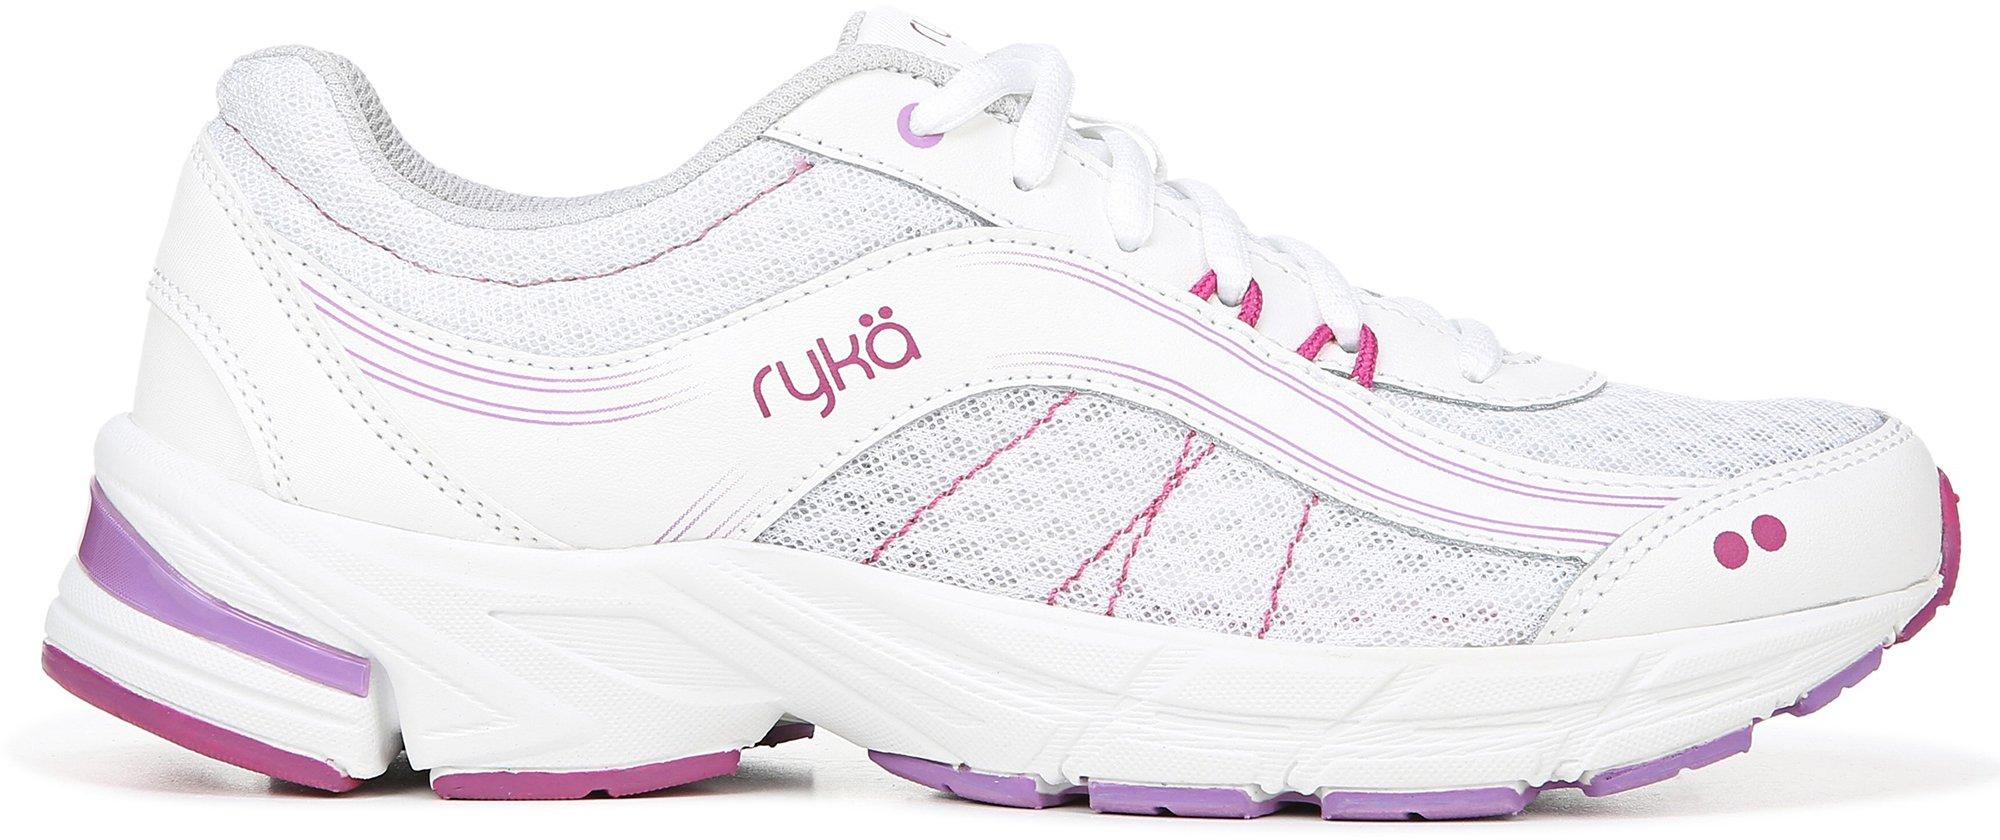 where can i buy ryka sneakers